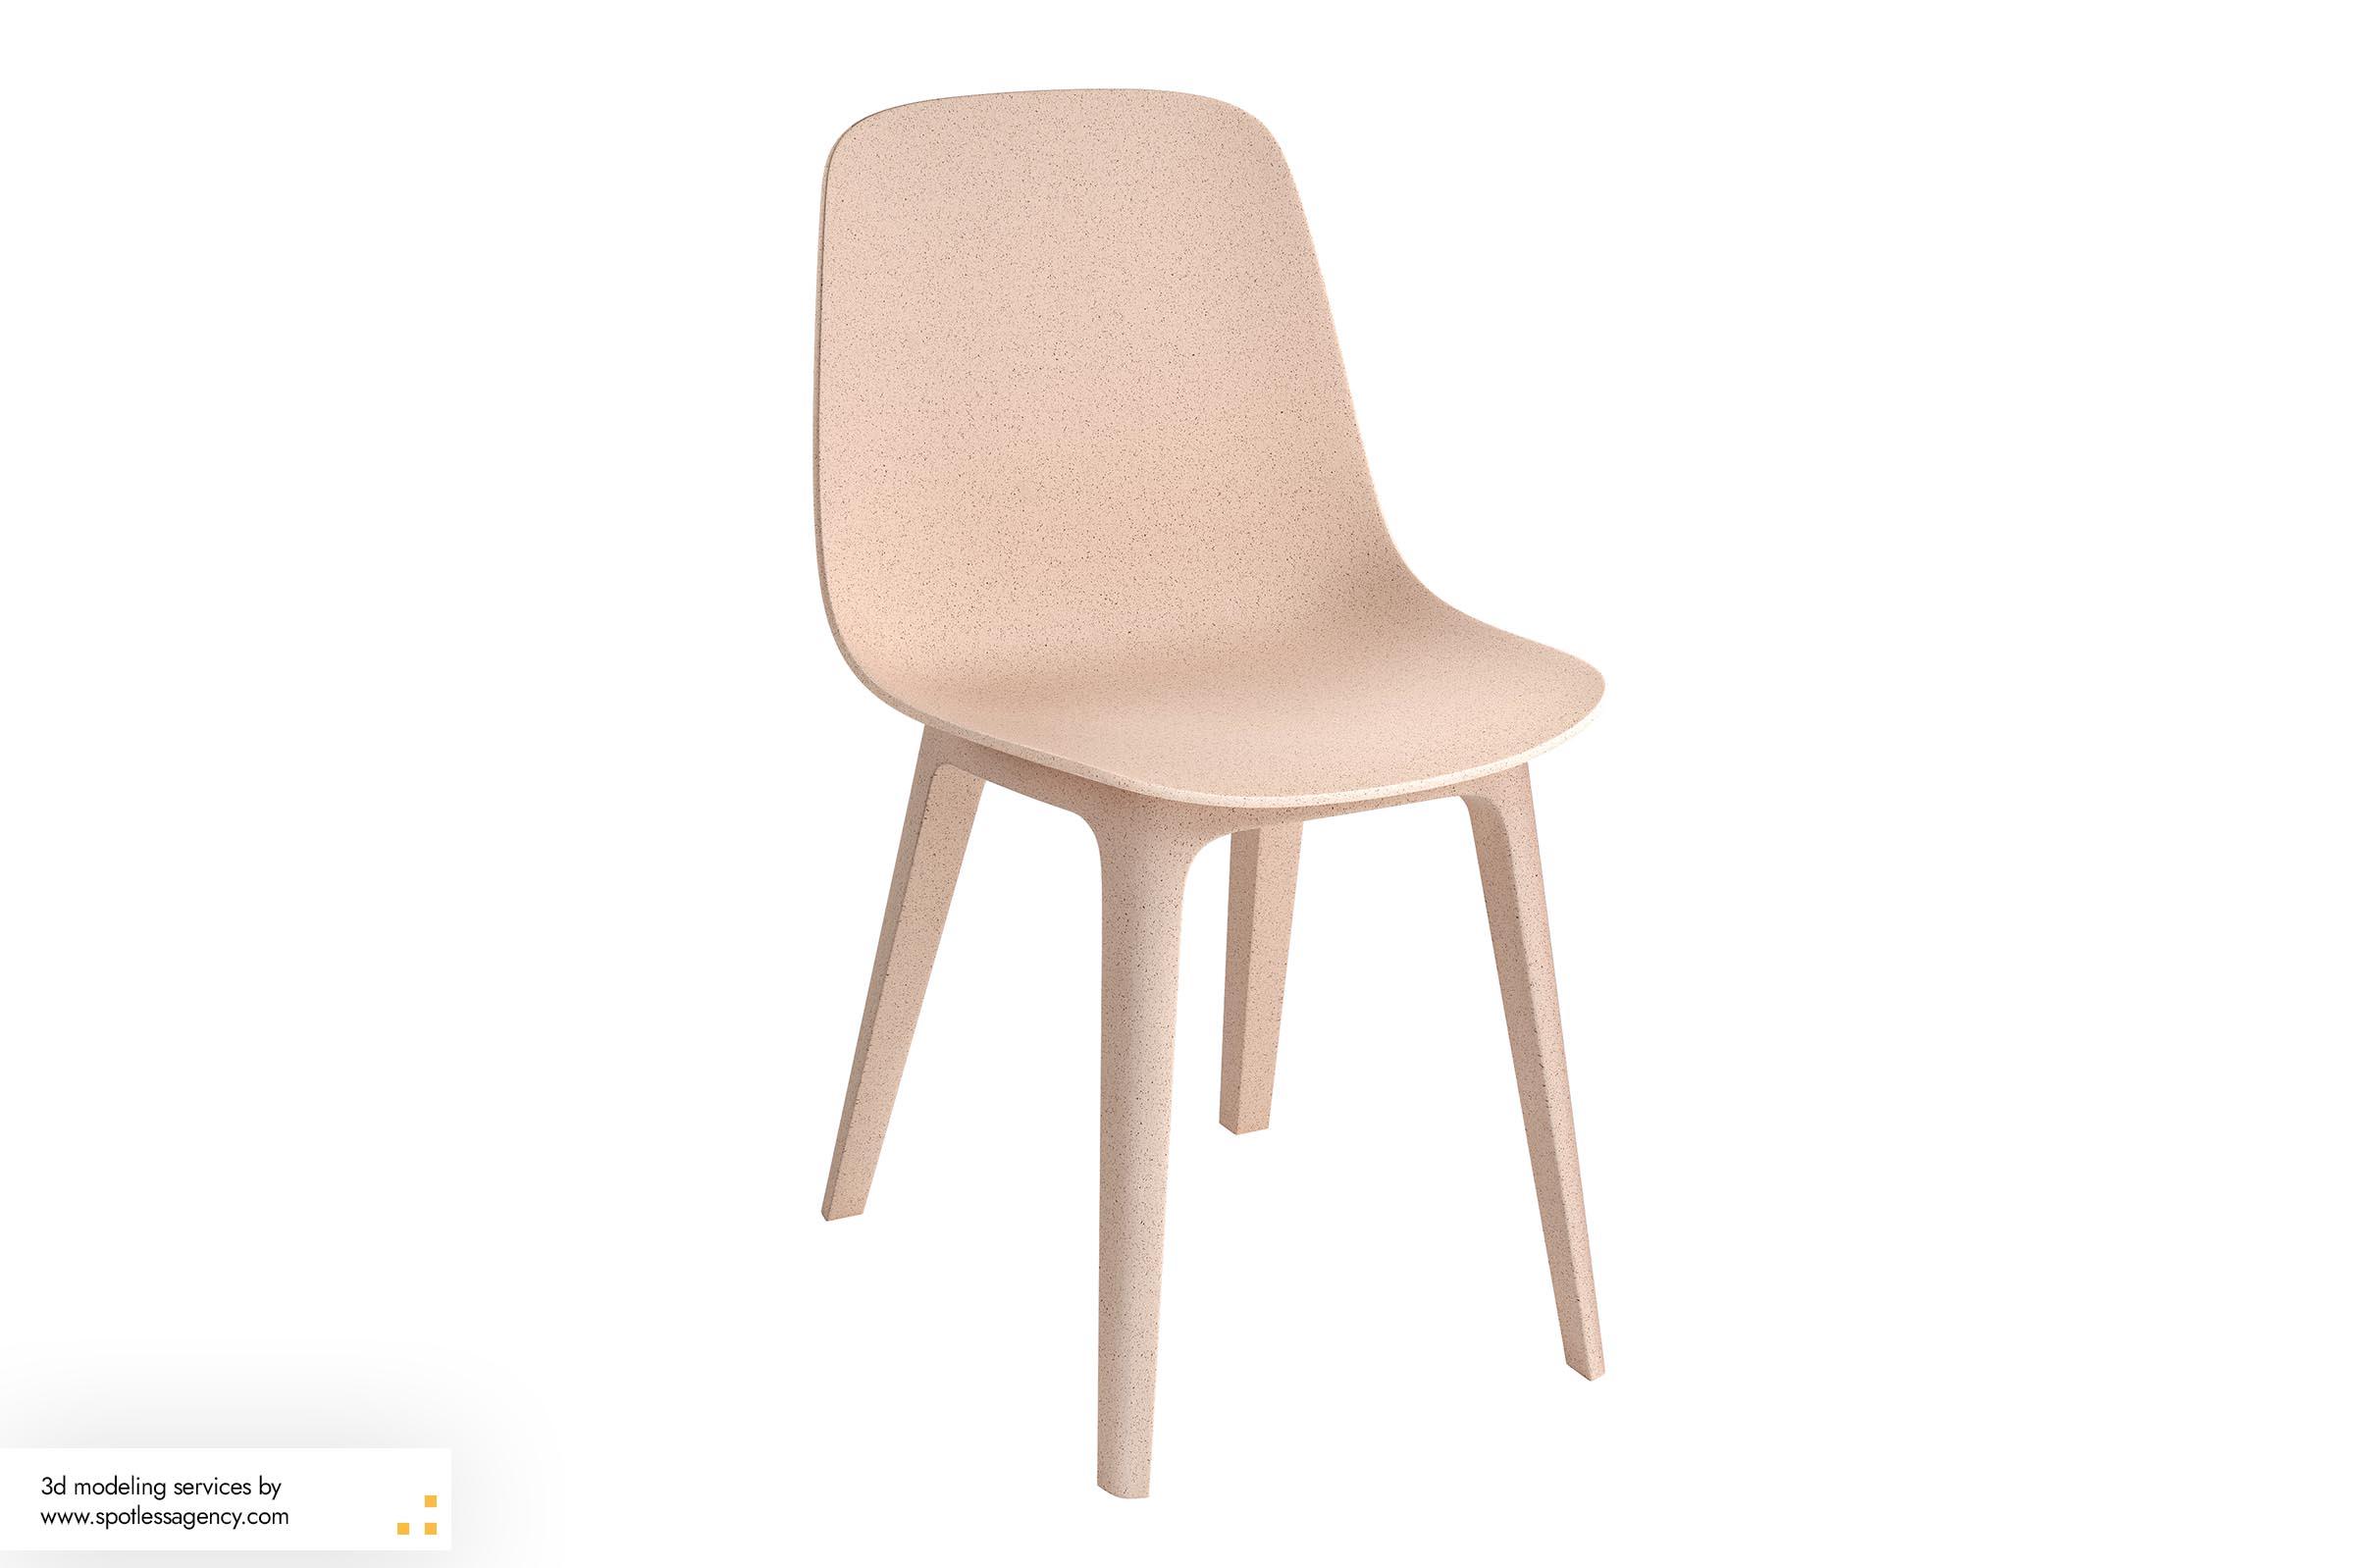 Chairs - 3d Modeling Services